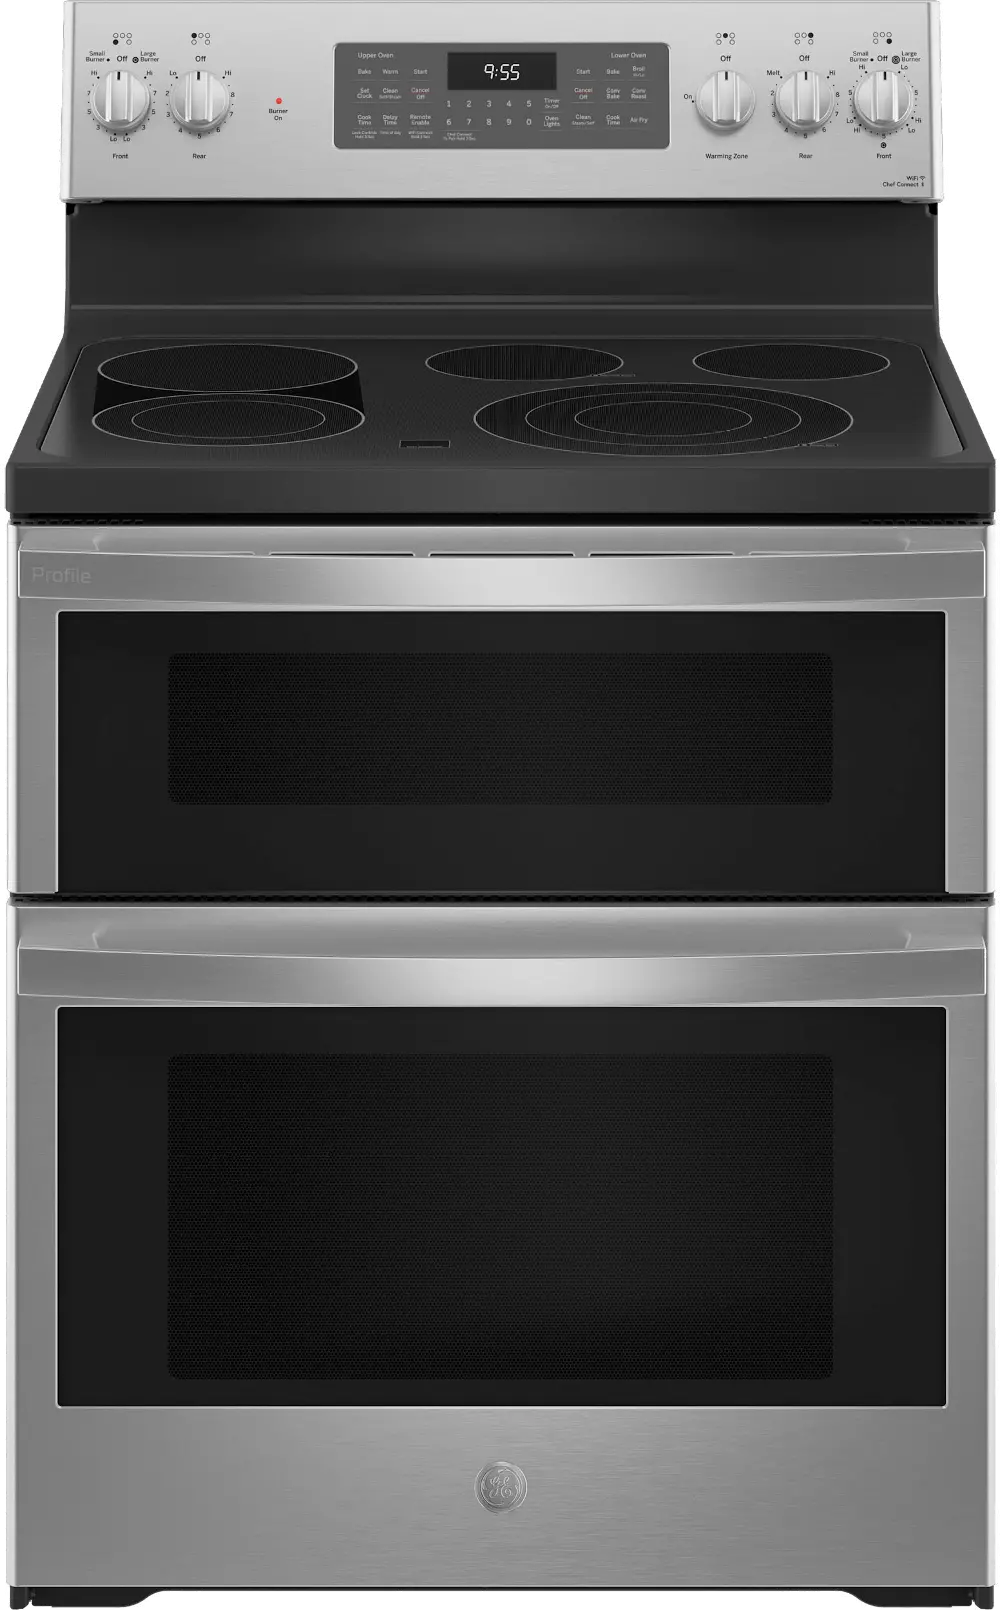 PB965YPFS GE Profile Double Oven Smart Electric Range - 6.6 cu. ft., Stainless Steel-1